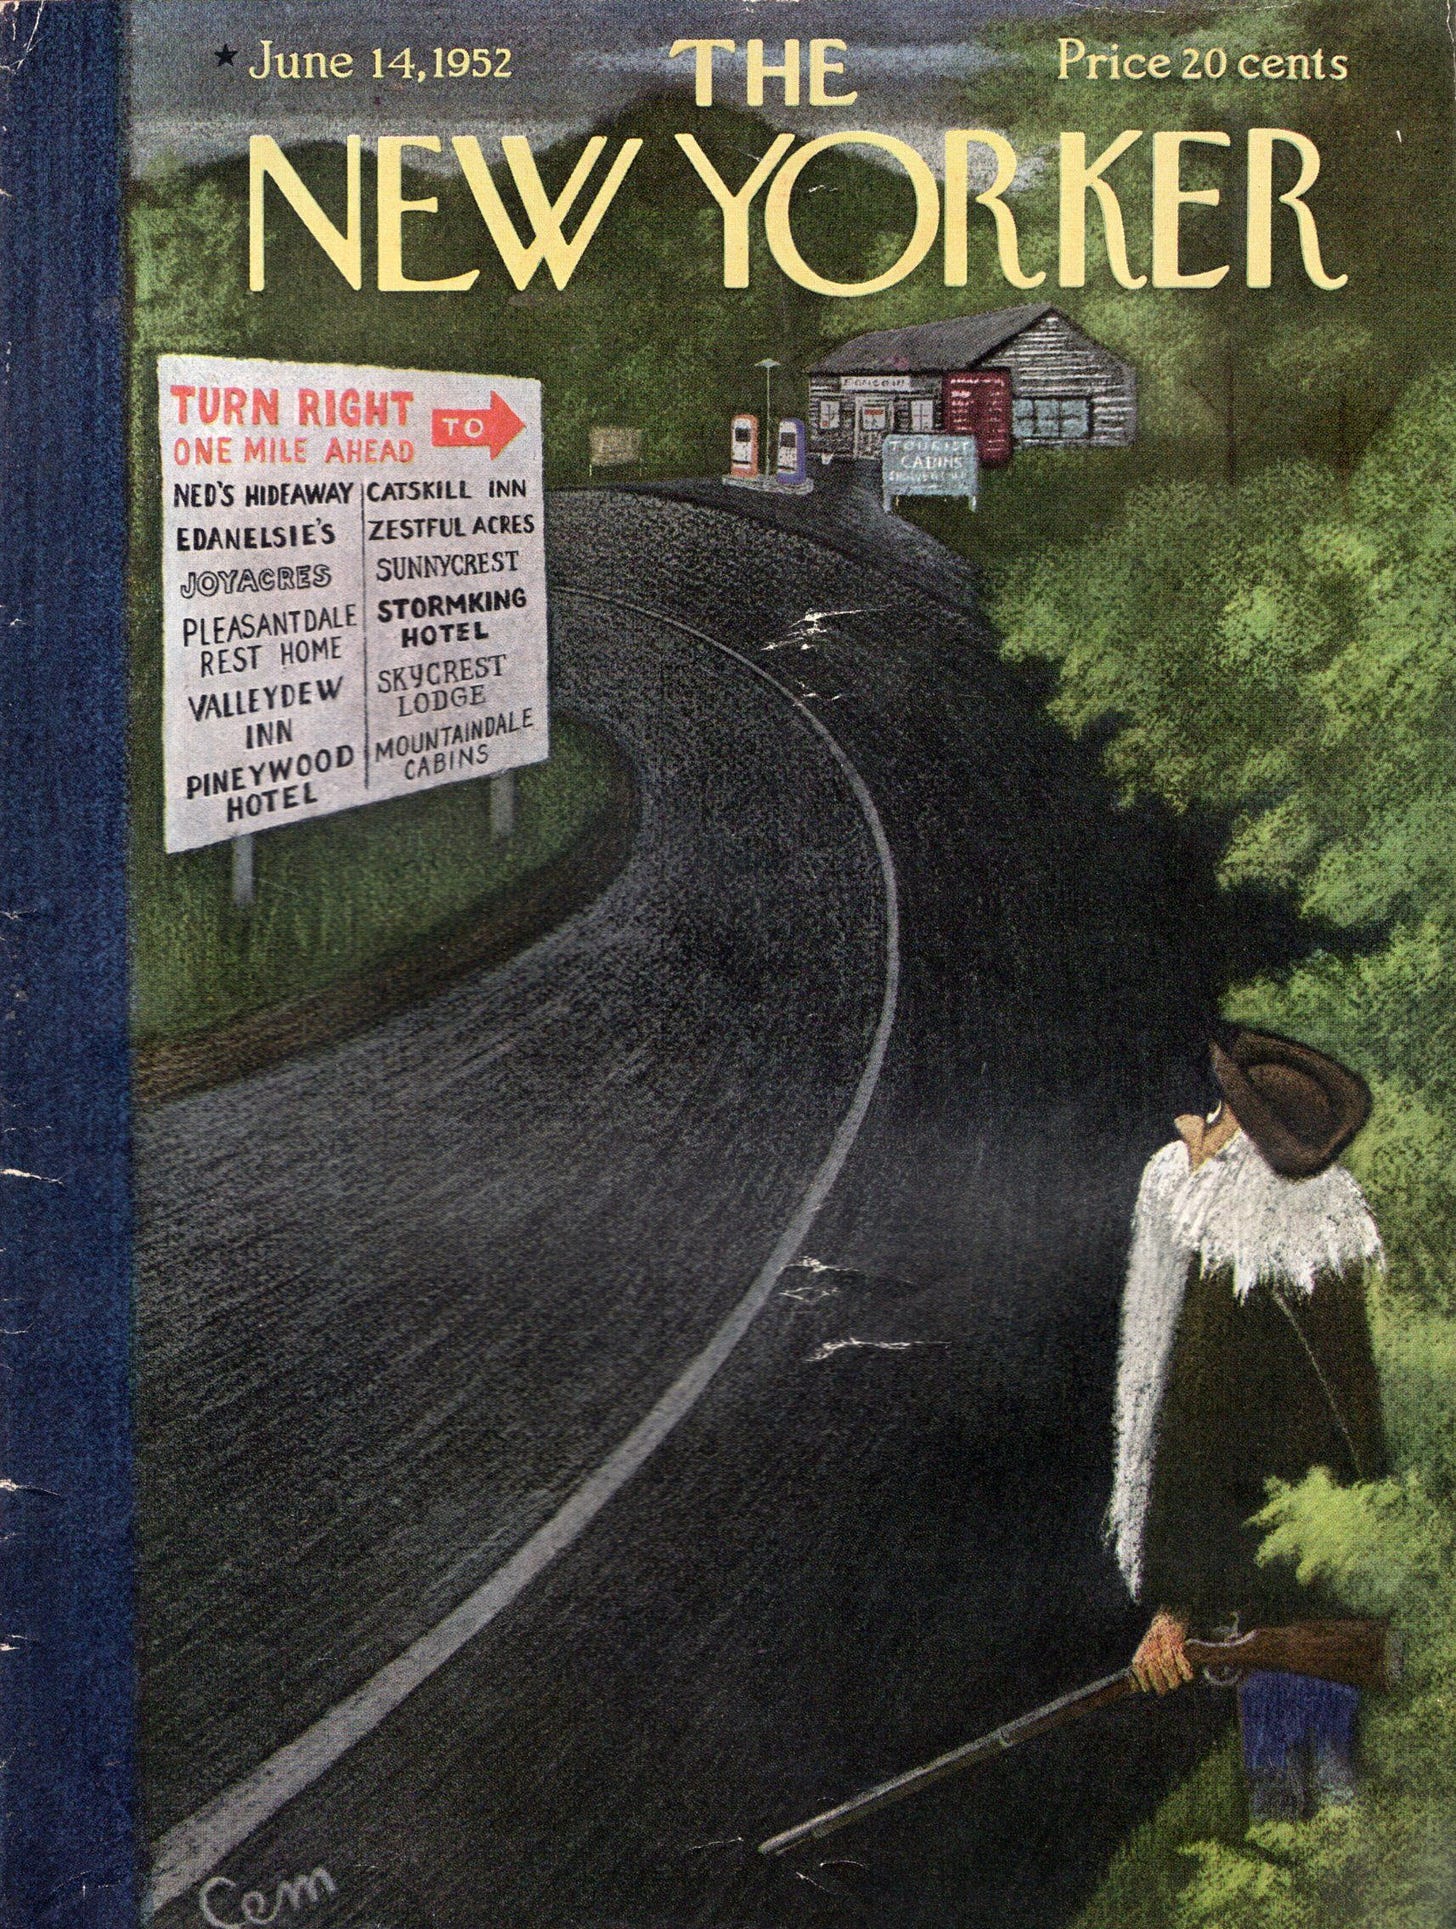 The New Yorker (Magazine): June 14, 1952 by Harold (editor) Ross -  Paperback - 1st - 1952 - from Dorley House Books (SKU: 119511)